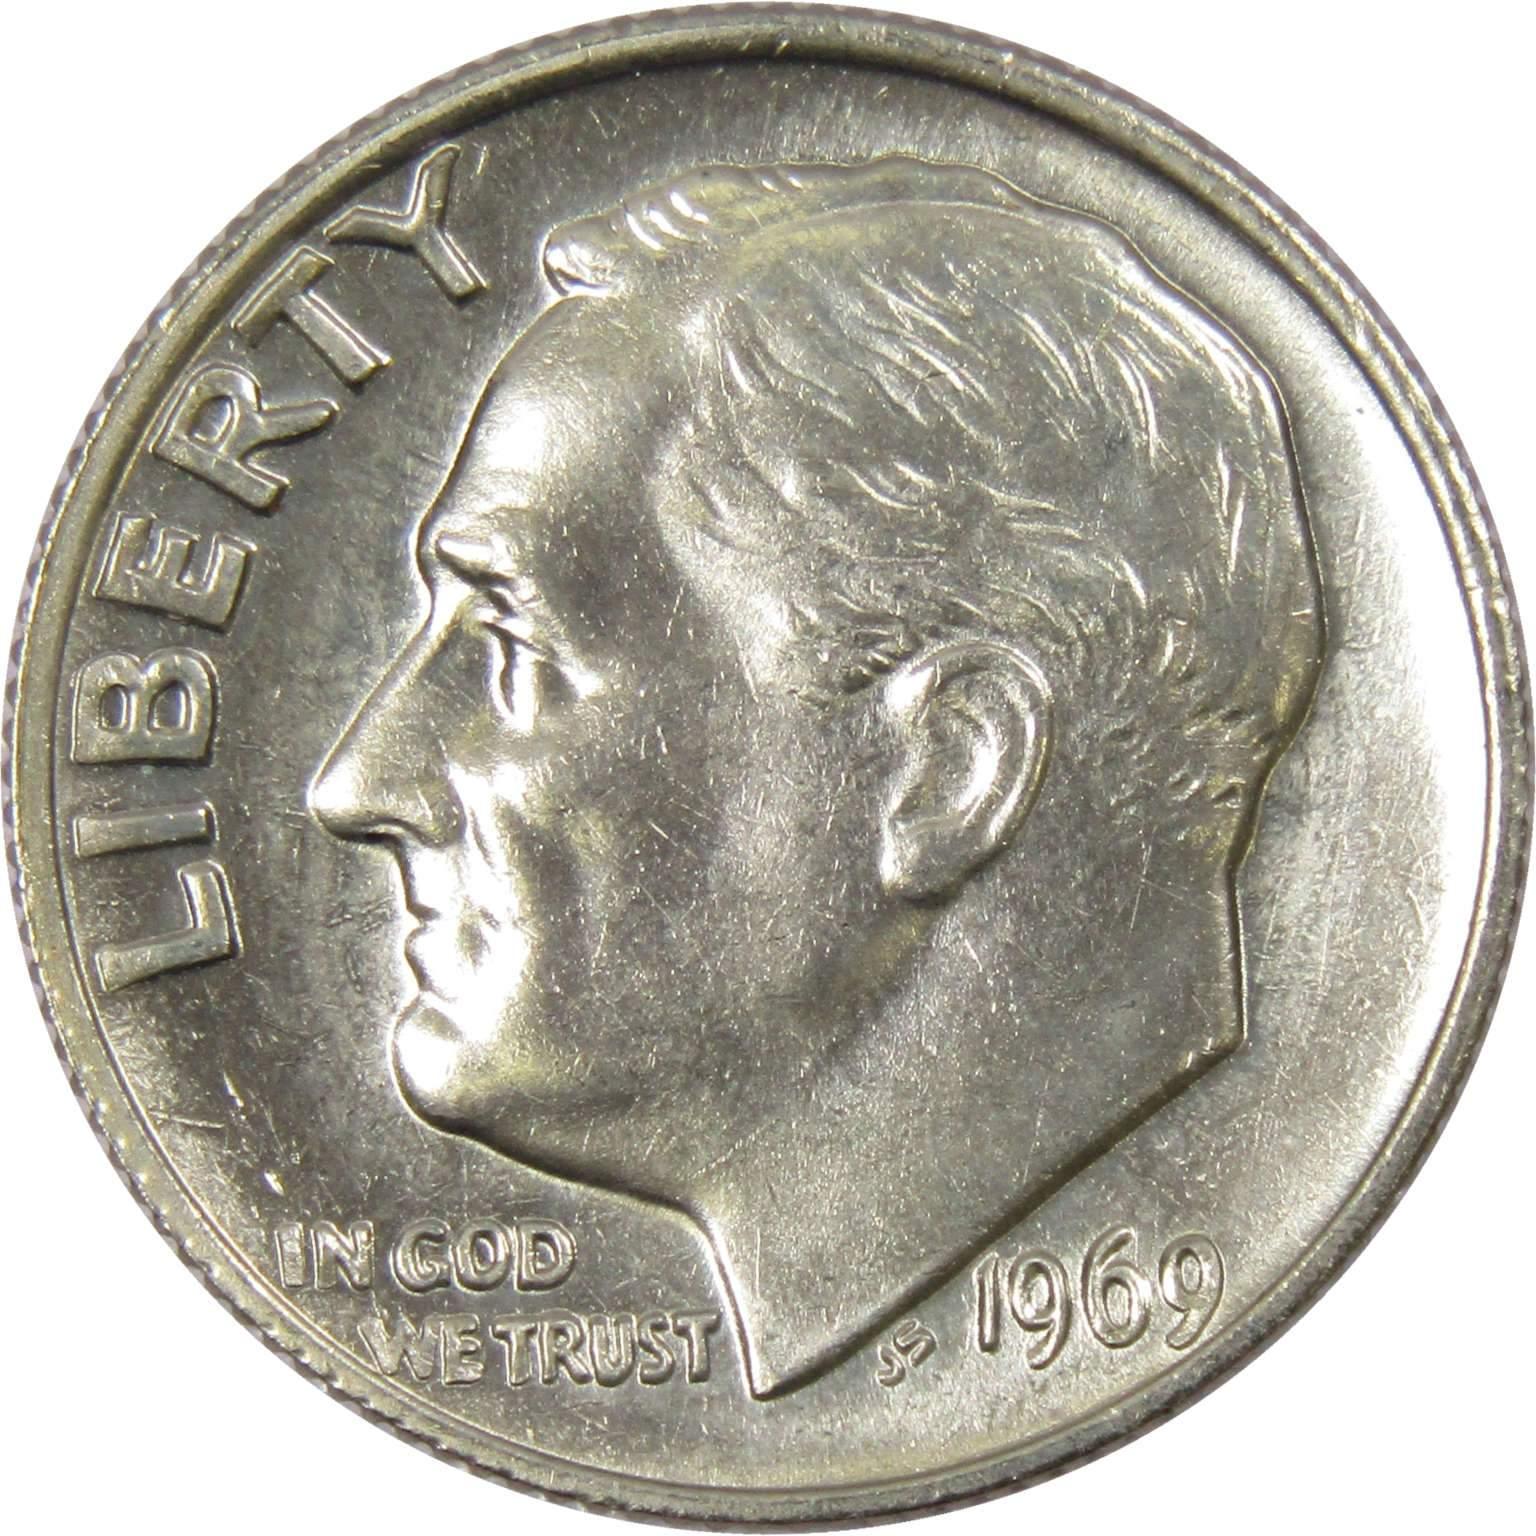 1969 Roosevelt Dime BU Uncirculated Mint State 10c US Coin Collectible